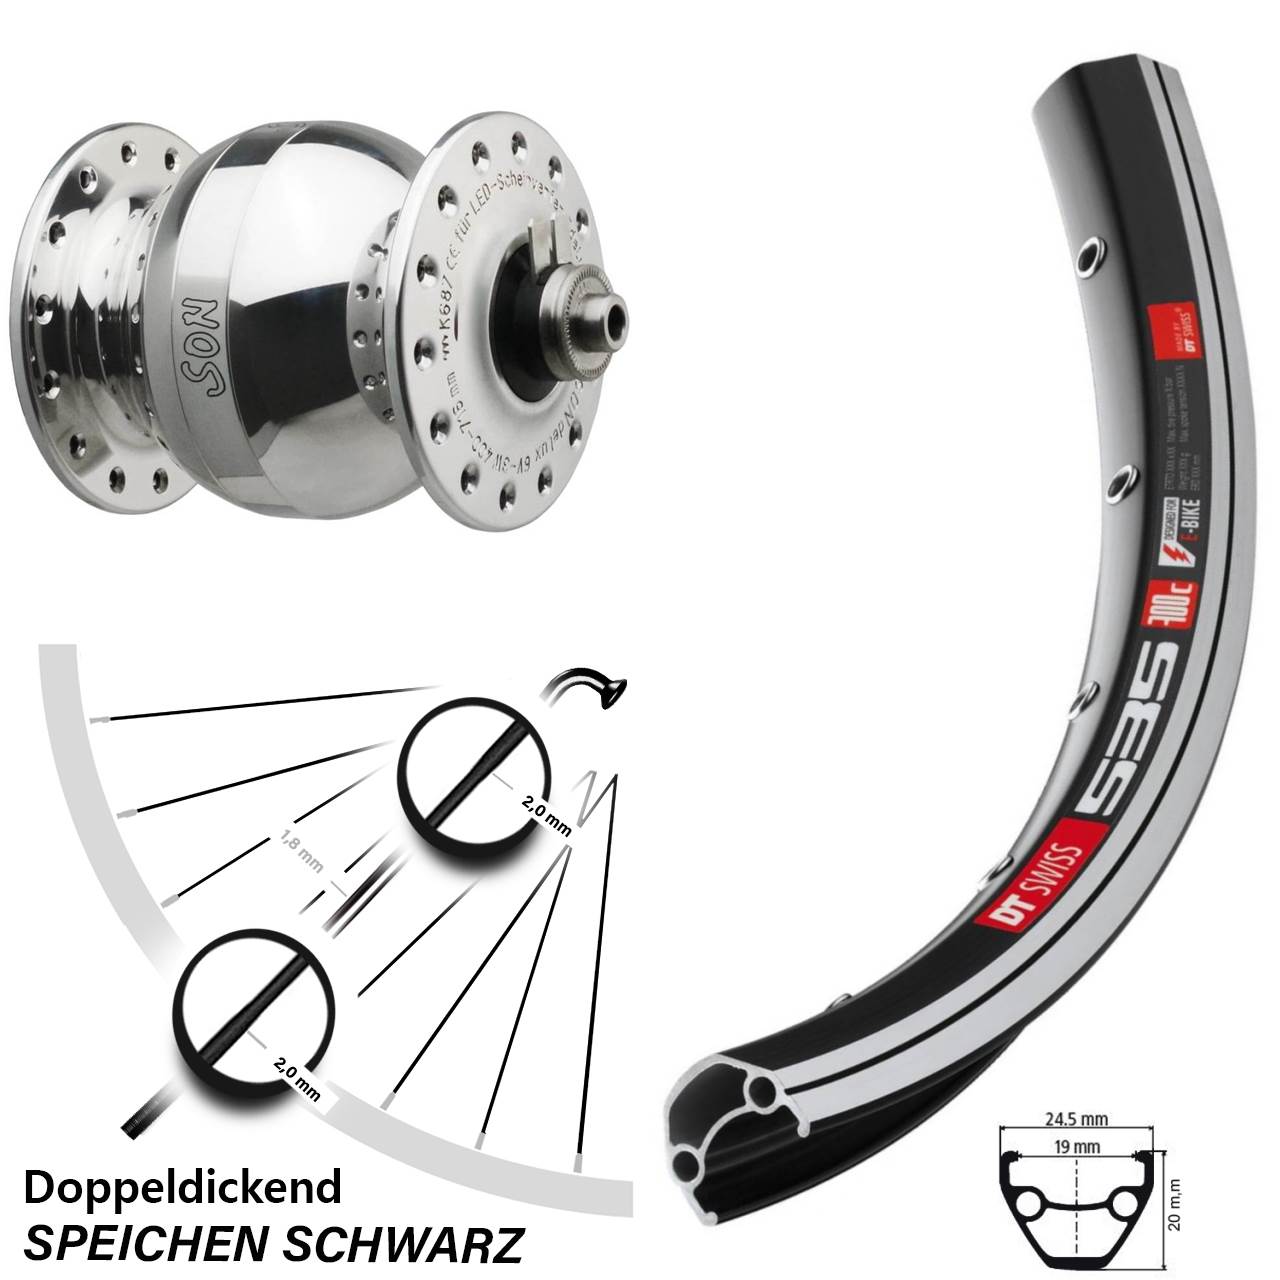 SON delux wide body DT Swiss 535 26 Zoll Nabendynamovorderrad QR